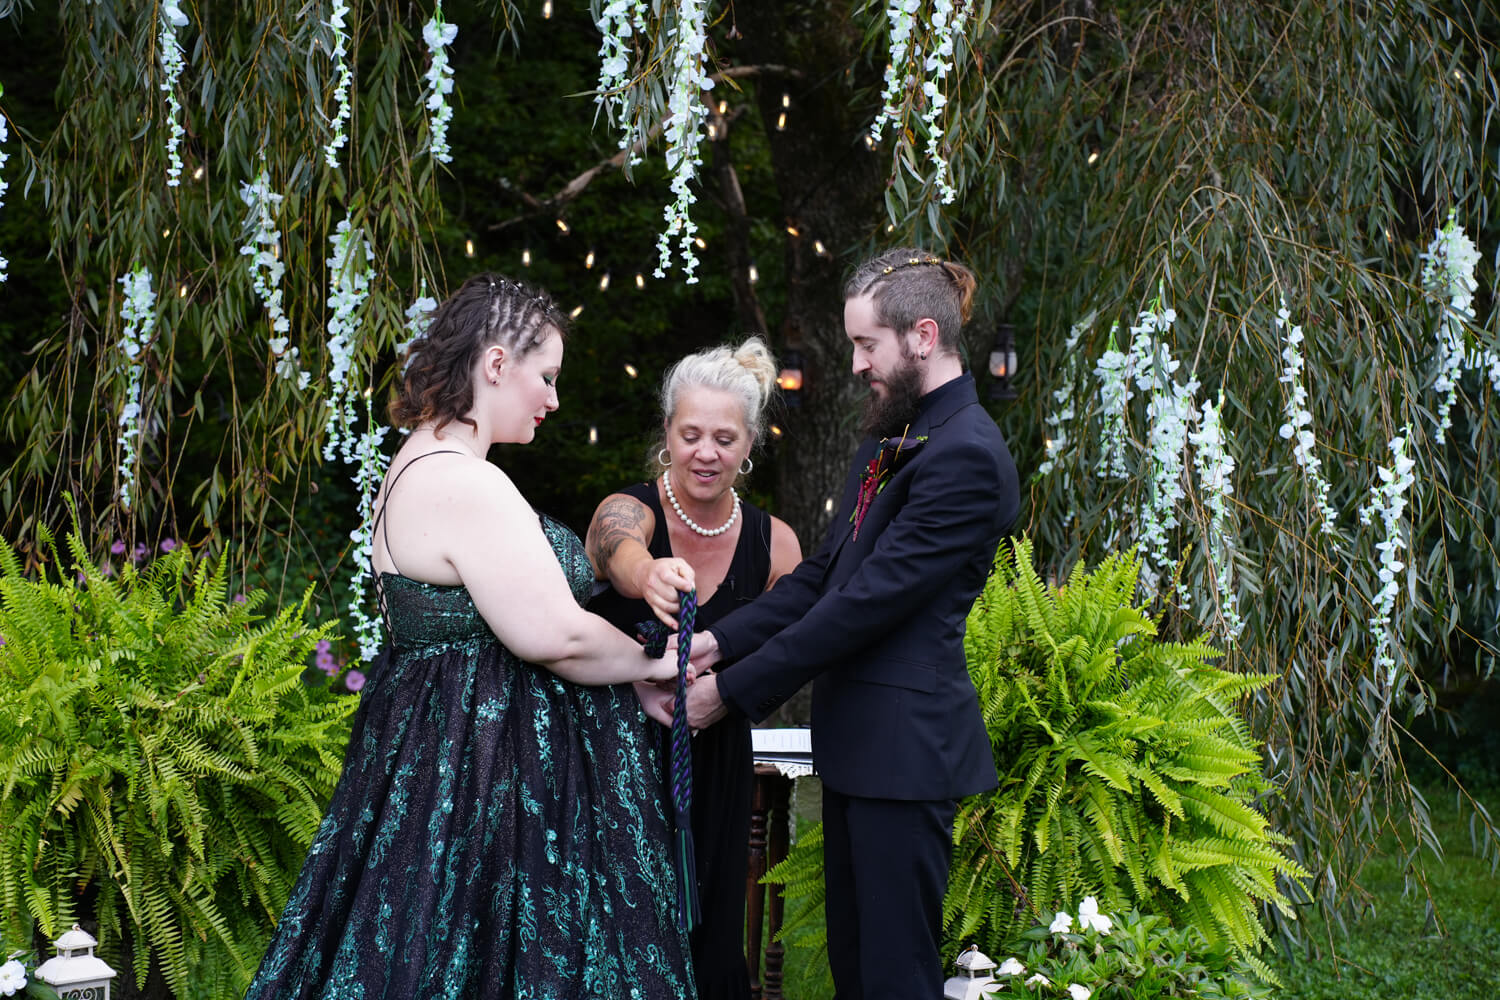 Hand fasting ceremony with dark green cords under a willow tree with white wisteria at Honeysuckle Hills in Pigeon Forge Tennessee